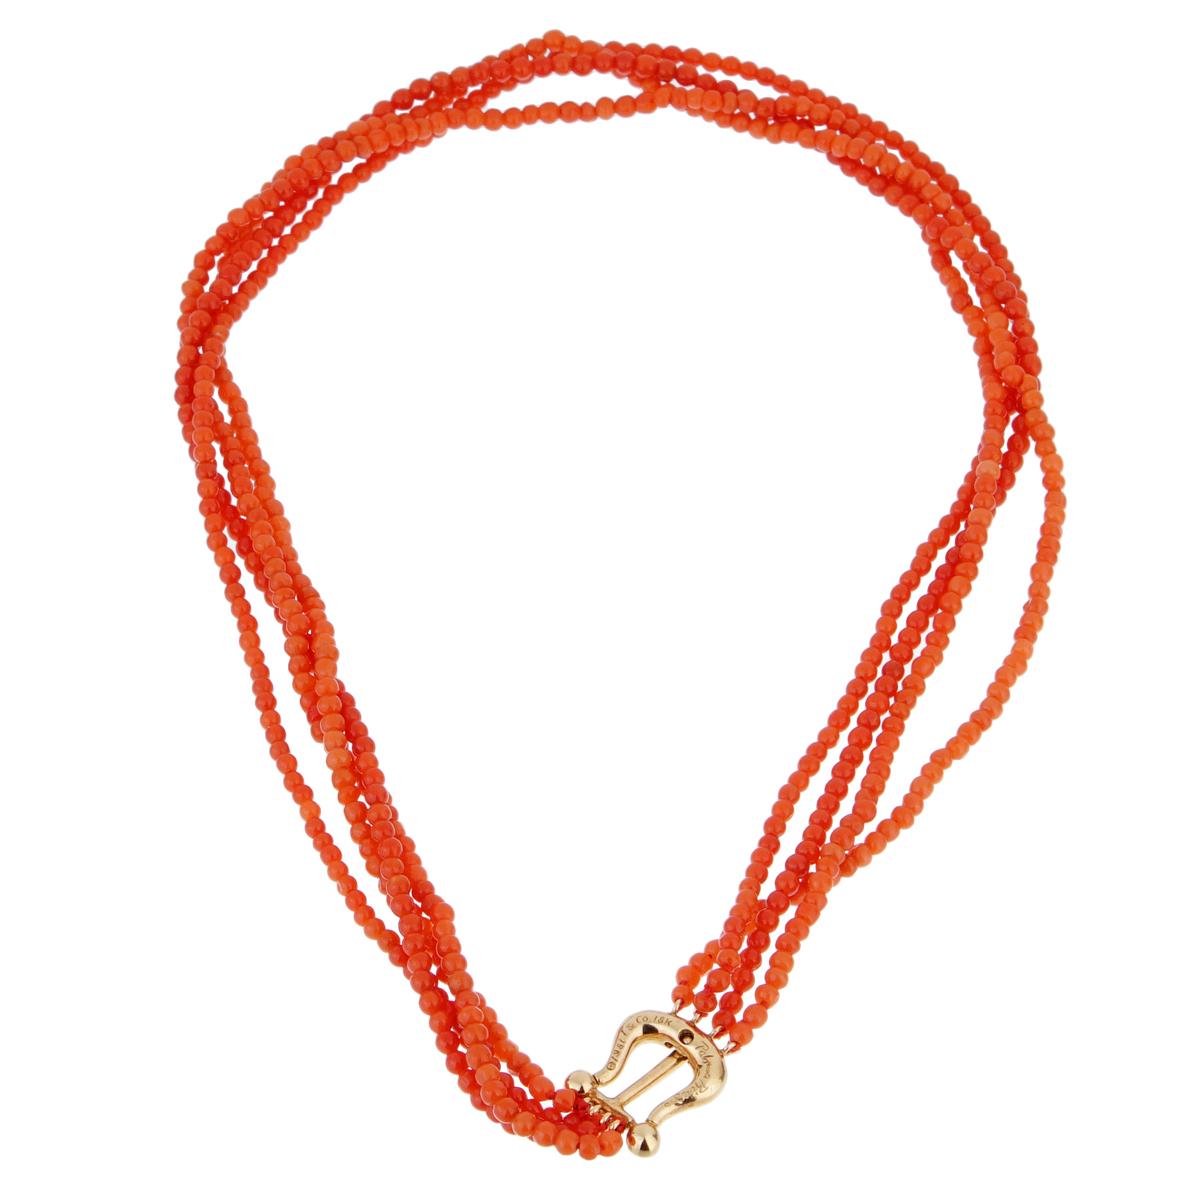 This gorgeous vintage Tiffany & Co. necklace features 4 strands of round natural coral beads measuring 3.0mm each and is completed with an 18k yellow gold clasp. Signed Paloma Picasso 1981